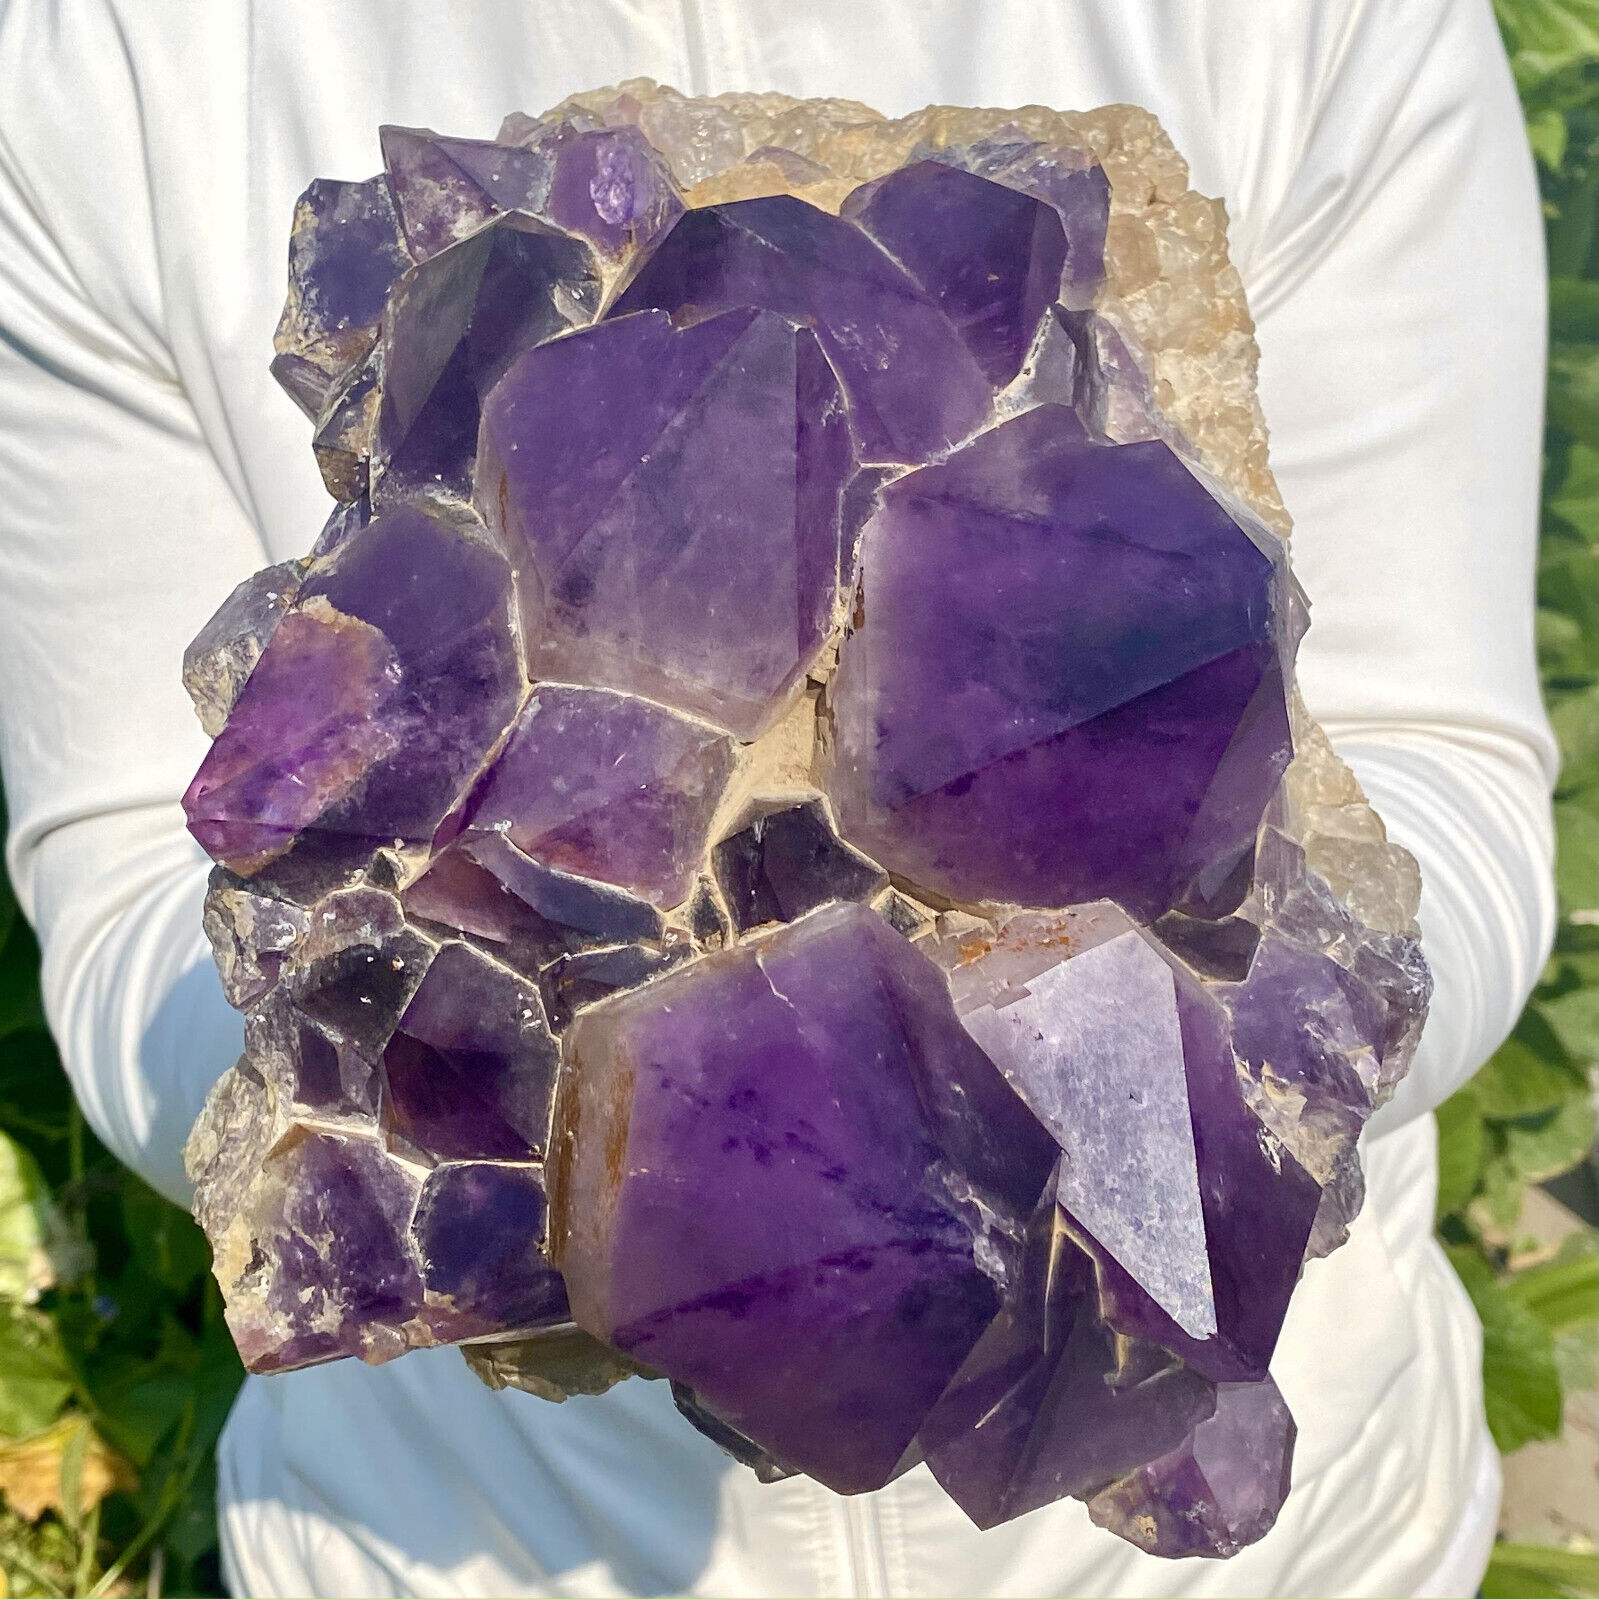 13.9LB Natural Amethyst backbone clustercrystal rod point healing therapy